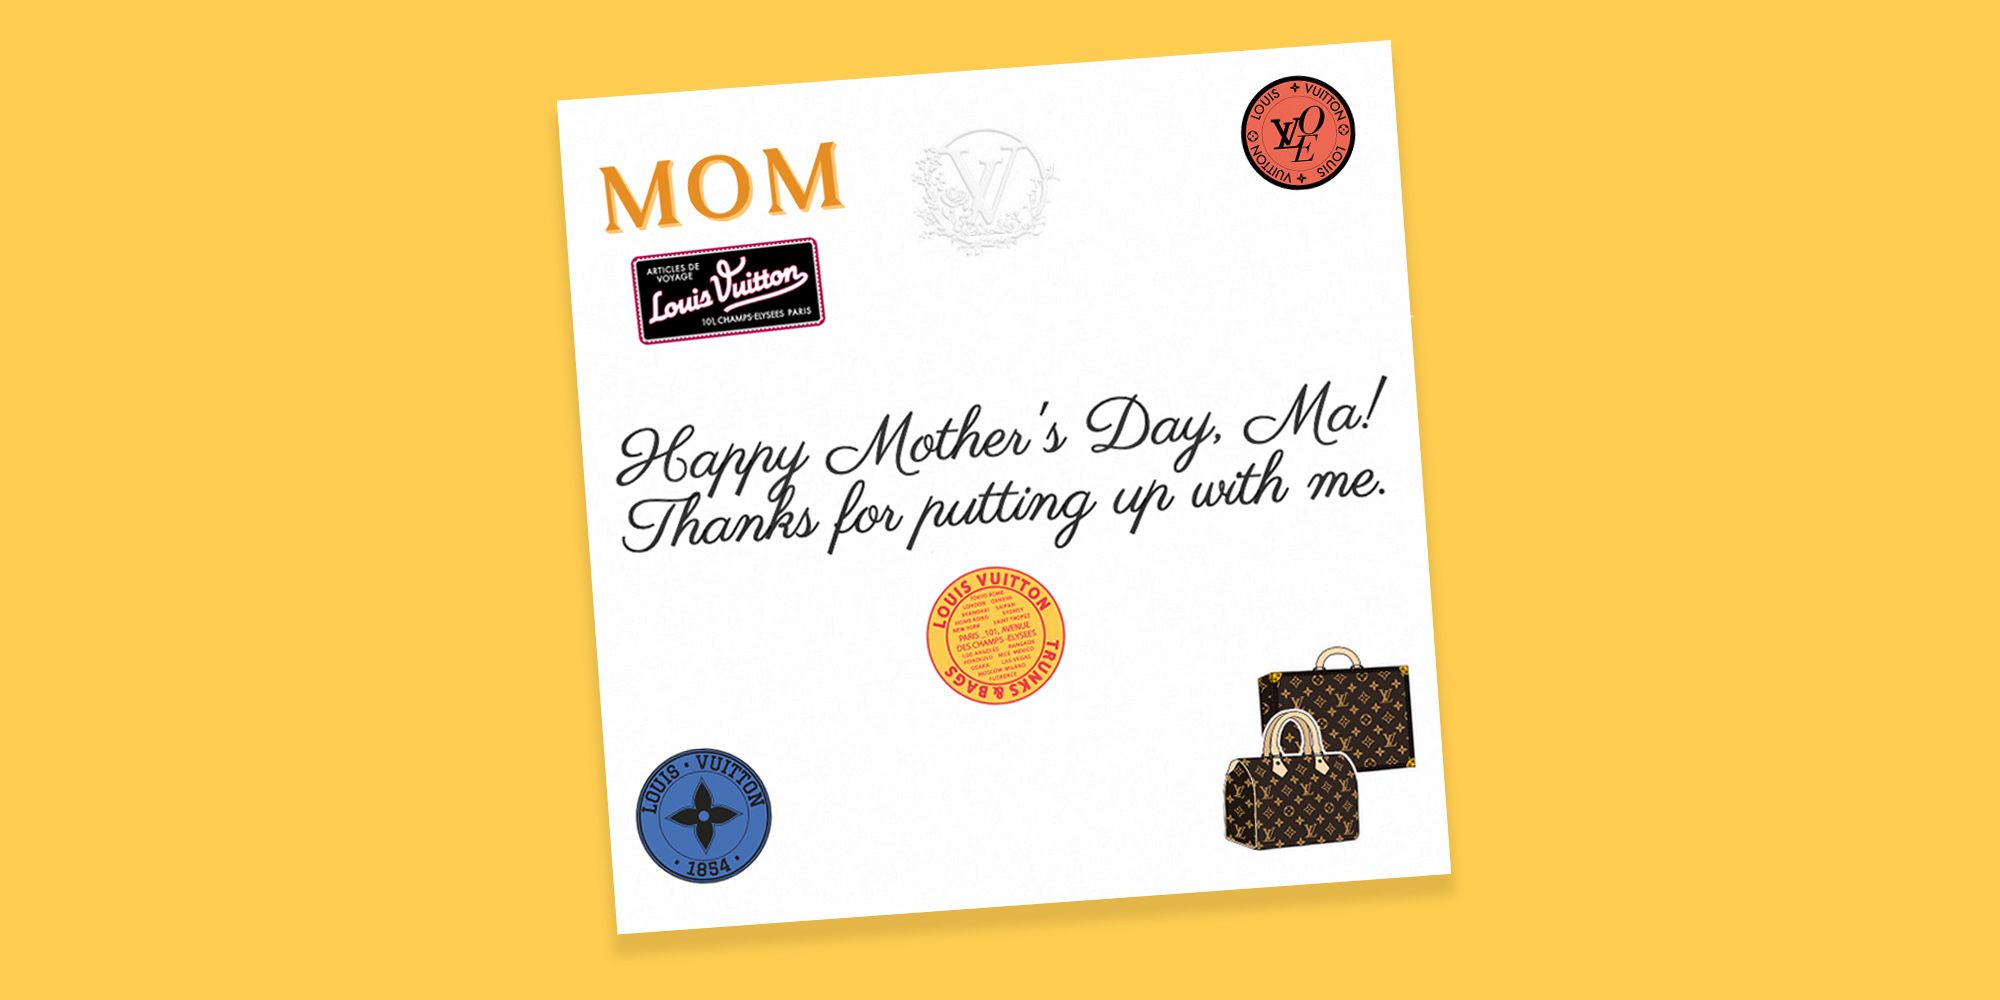 Louis Vuitton Offers Free Treats to Give Mom for Mother's Day — These Cards  Are Anything But Ordinary